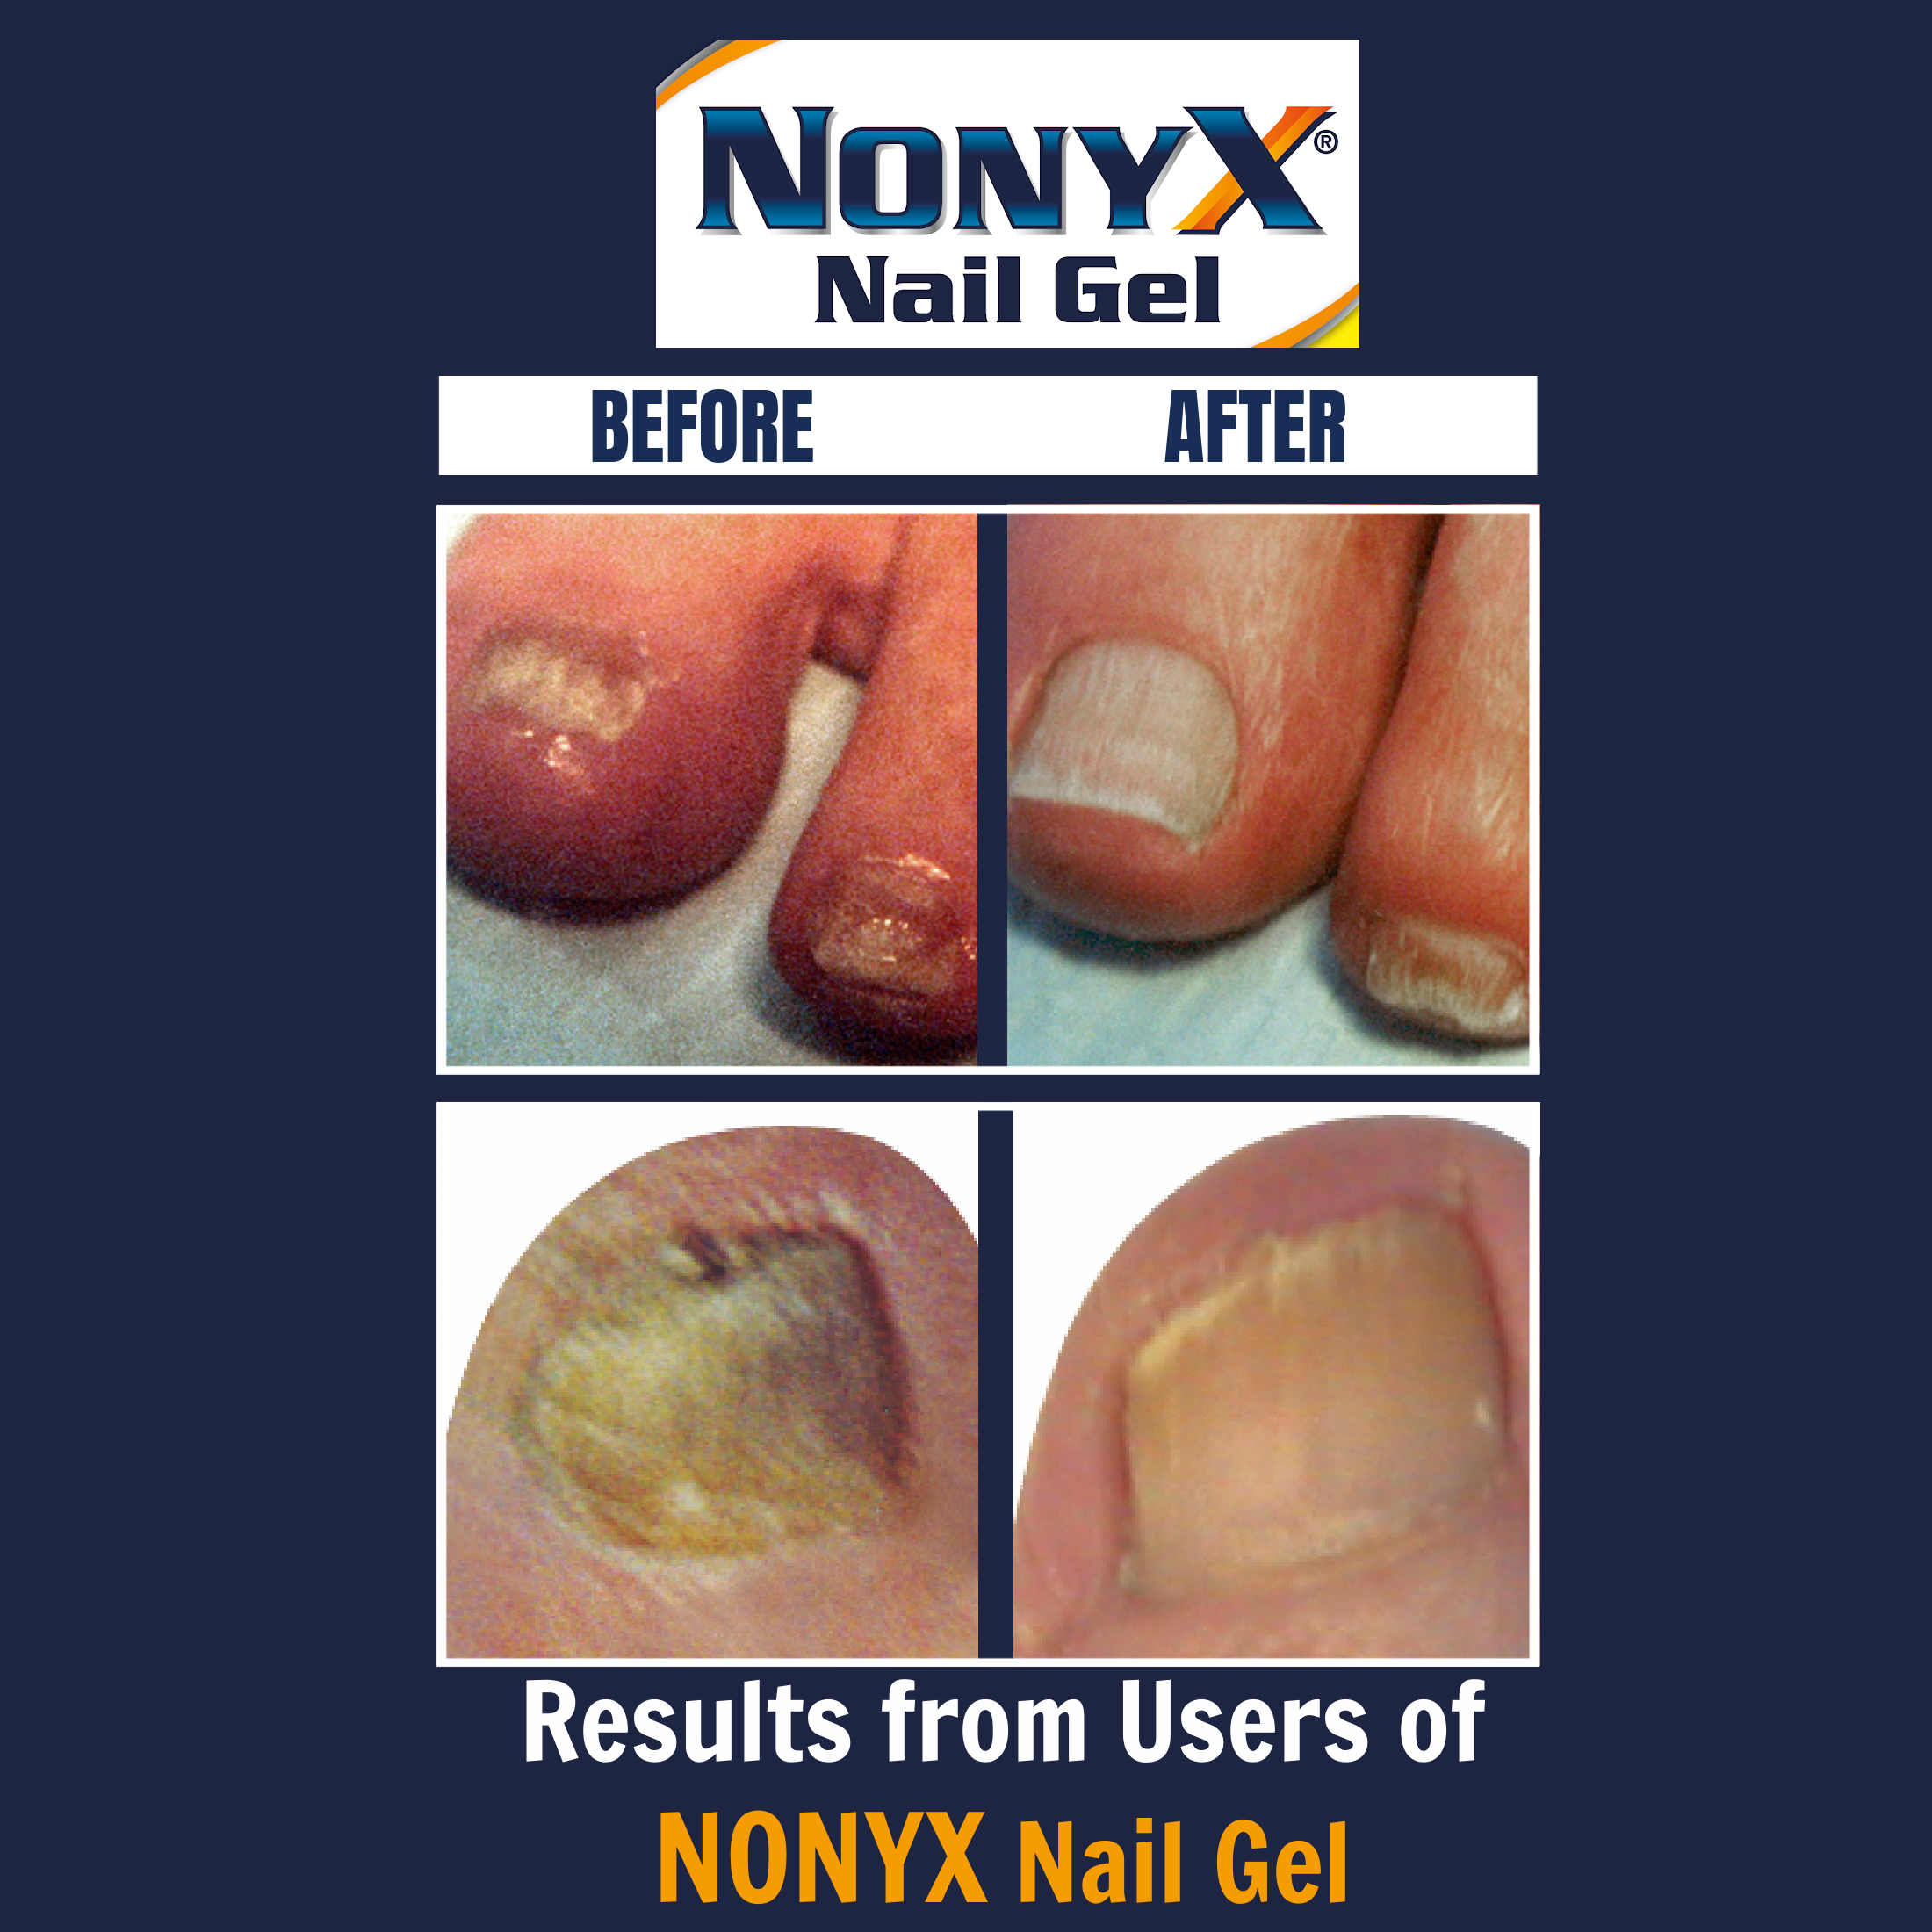 Nonyx Fungal Nail Clarifying Gel | Clinically Proven Effective for Fungus Damaged Toenails | Results are Money-back Guaranteed, 4 oz. - image 5 of 9